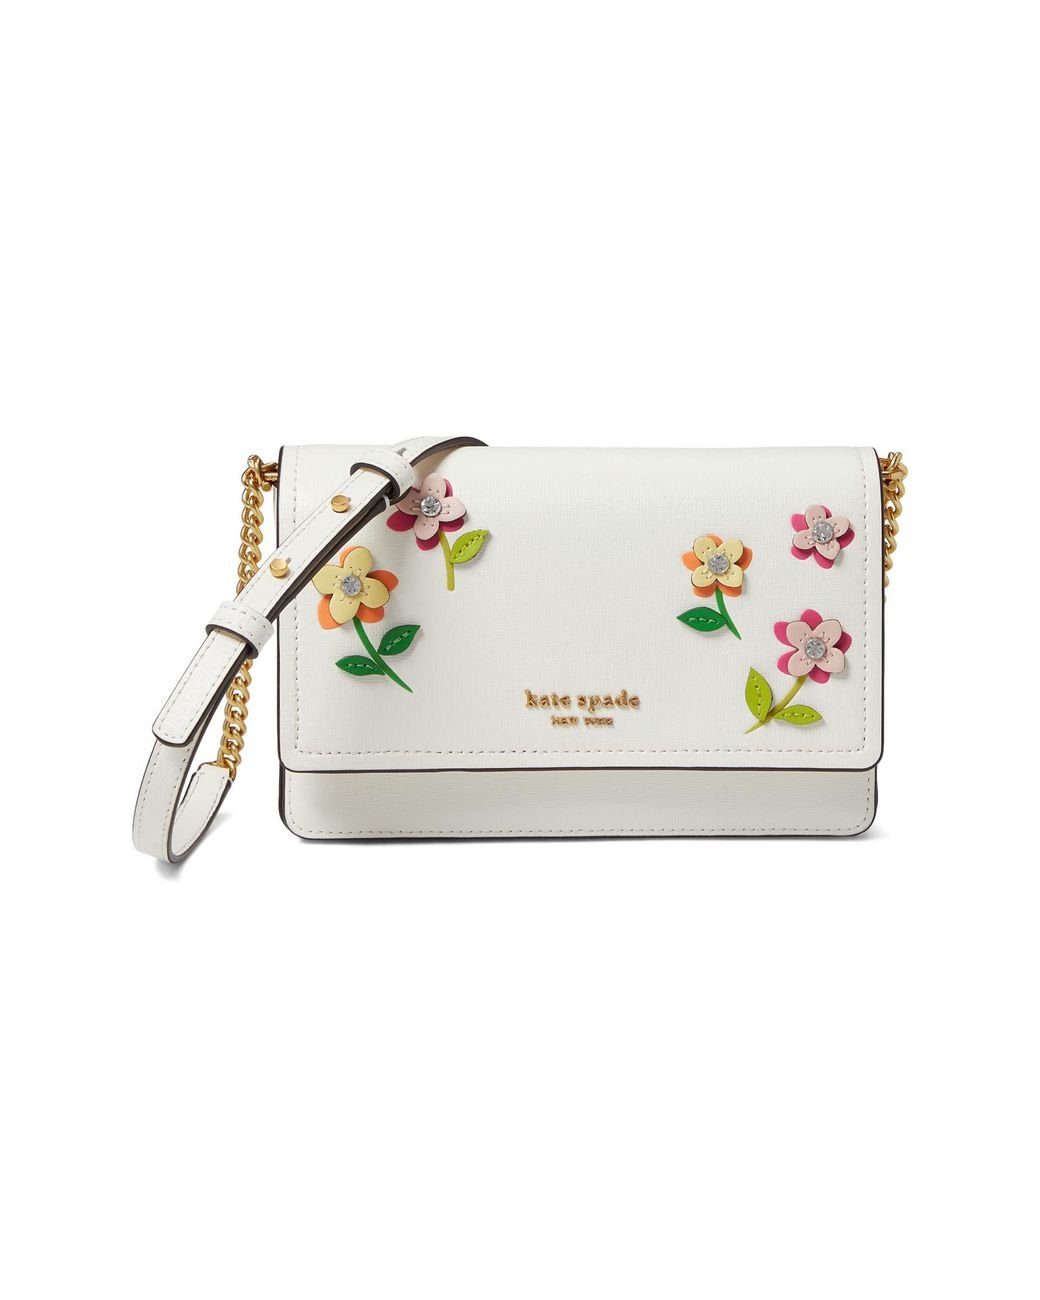 Kate Spade In Bloom Flower Appliqued Saffiano Leather Flap Chain